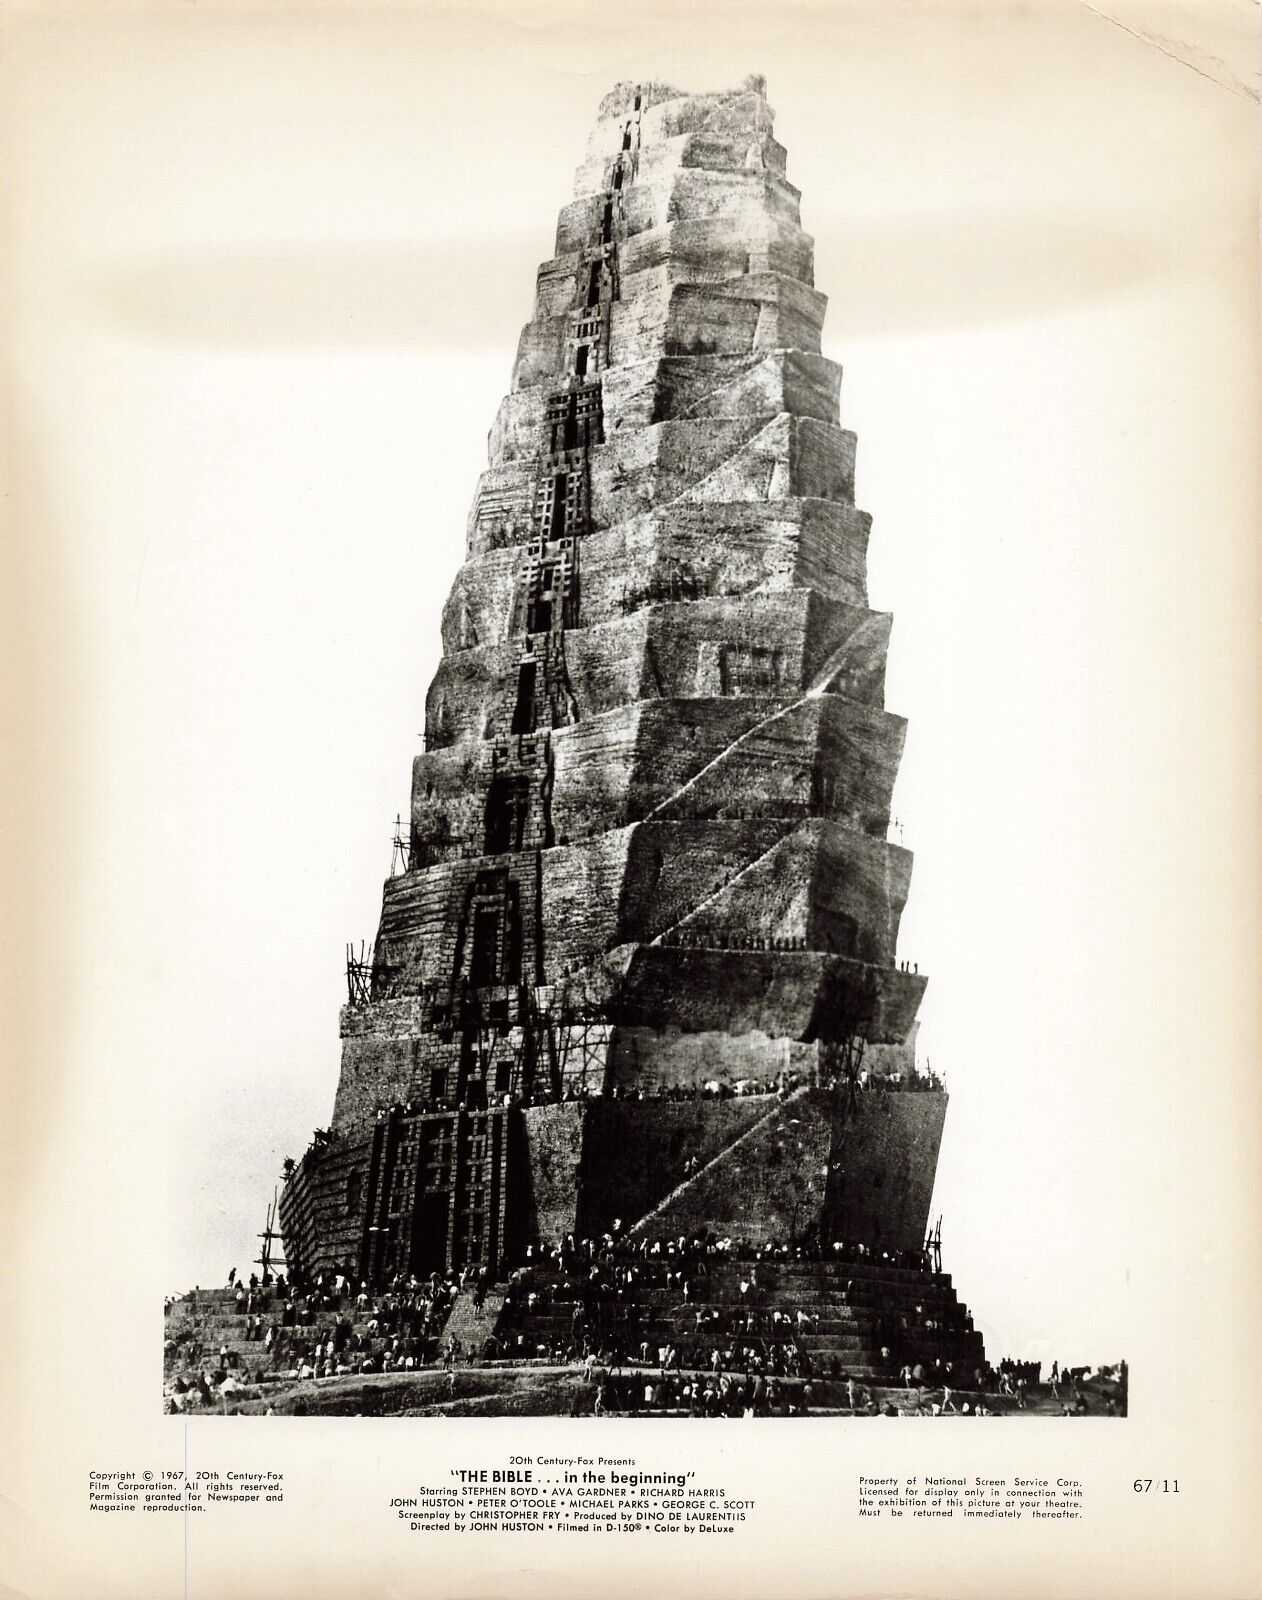 The Bible in the beginning 1966 Movie Photo 8x10 Tower of Babel  *P101c